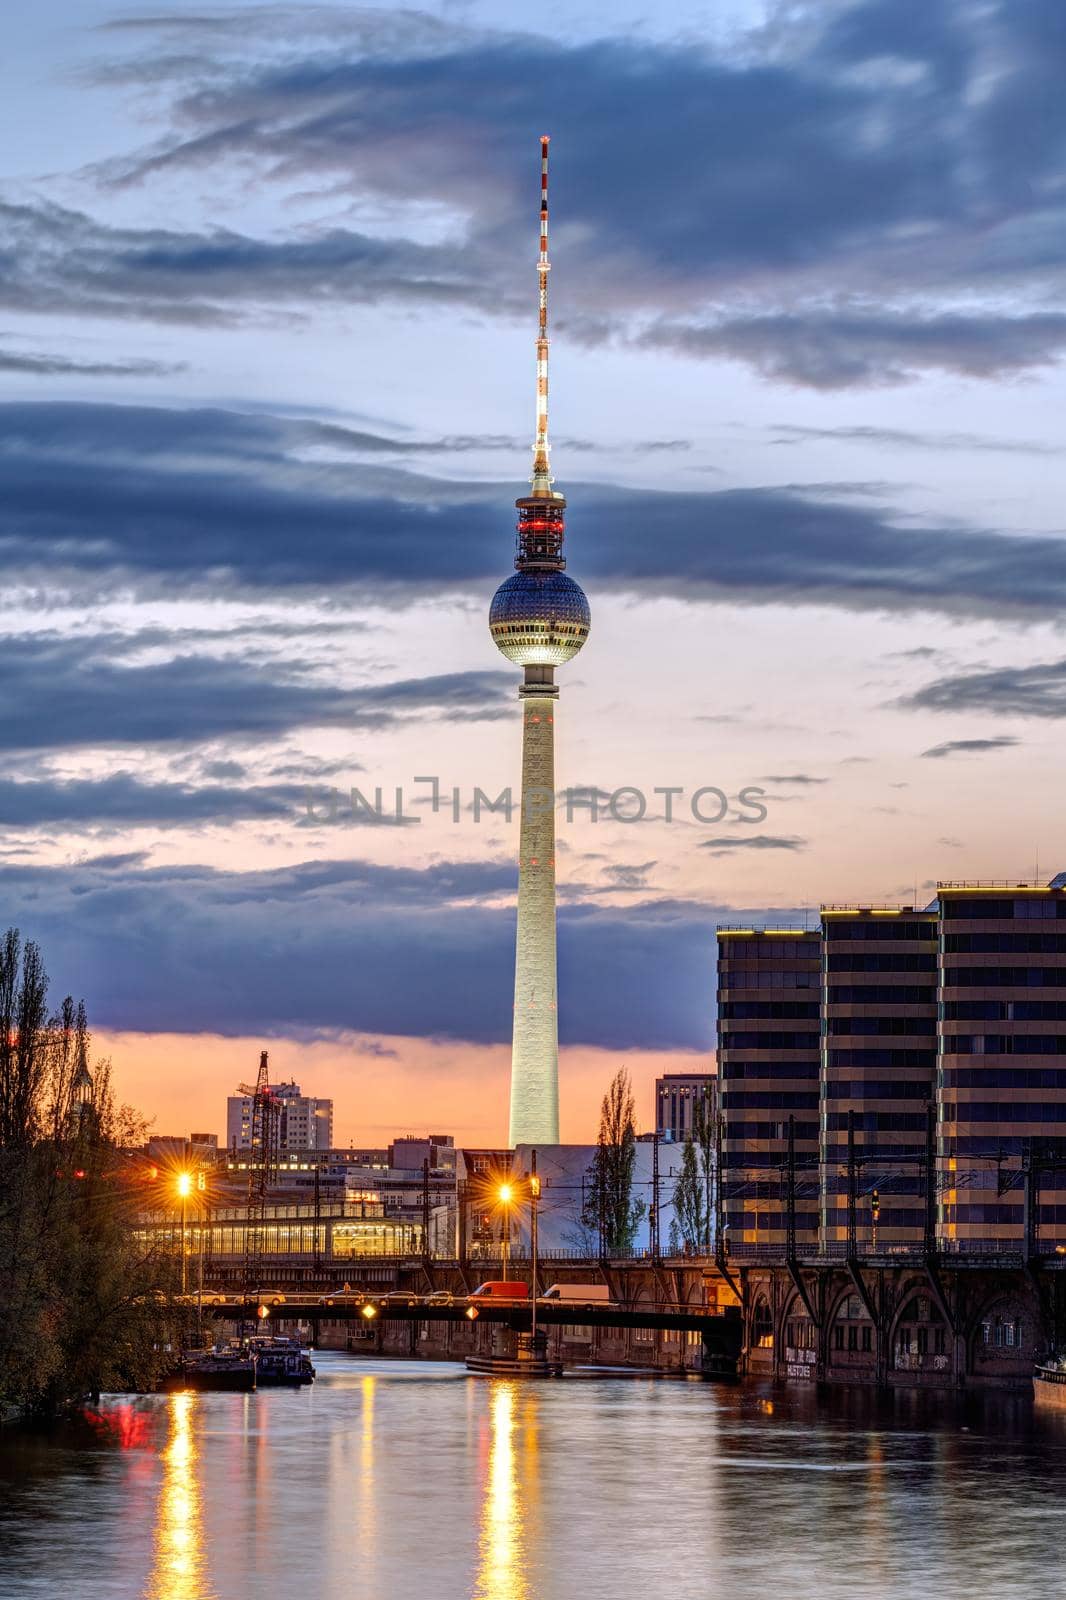 The skyline of Berlin with the famous TV Tower and the river Spree after sunset